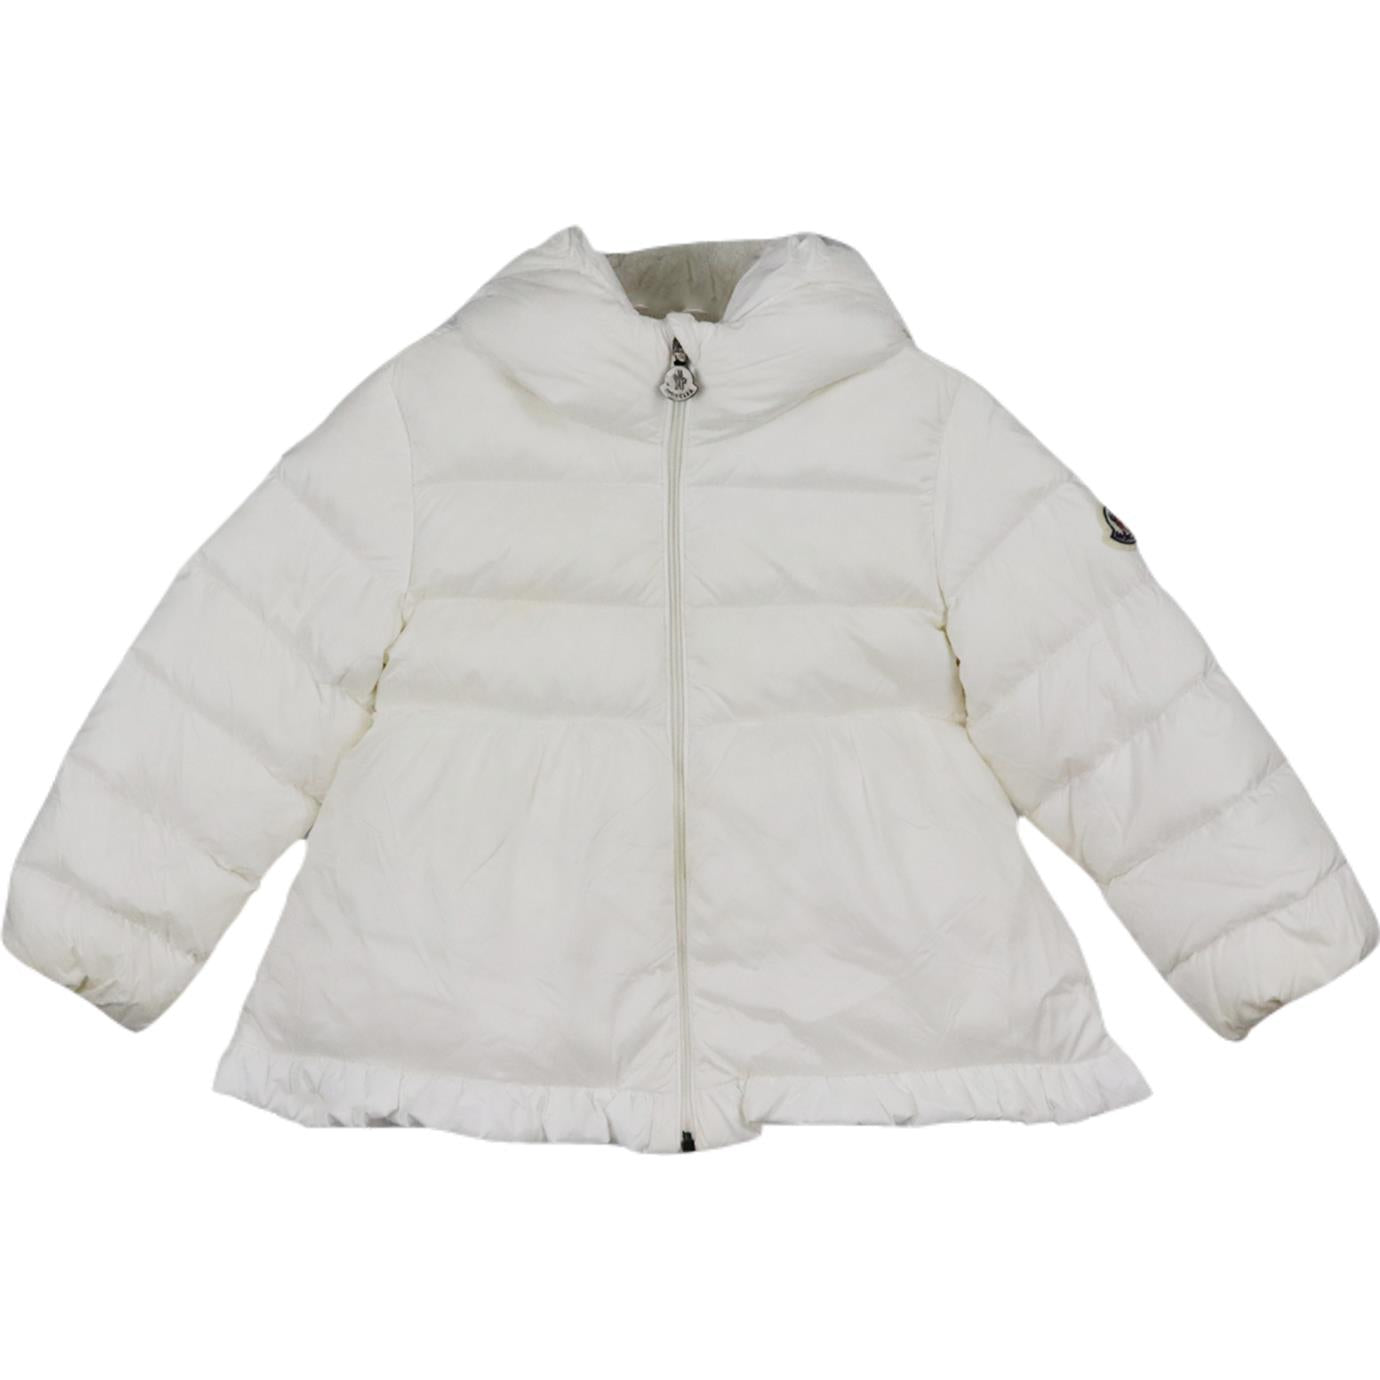 MONCLER BABY GIRLS DOWN PADDED JACKET 18-24 MONTHS